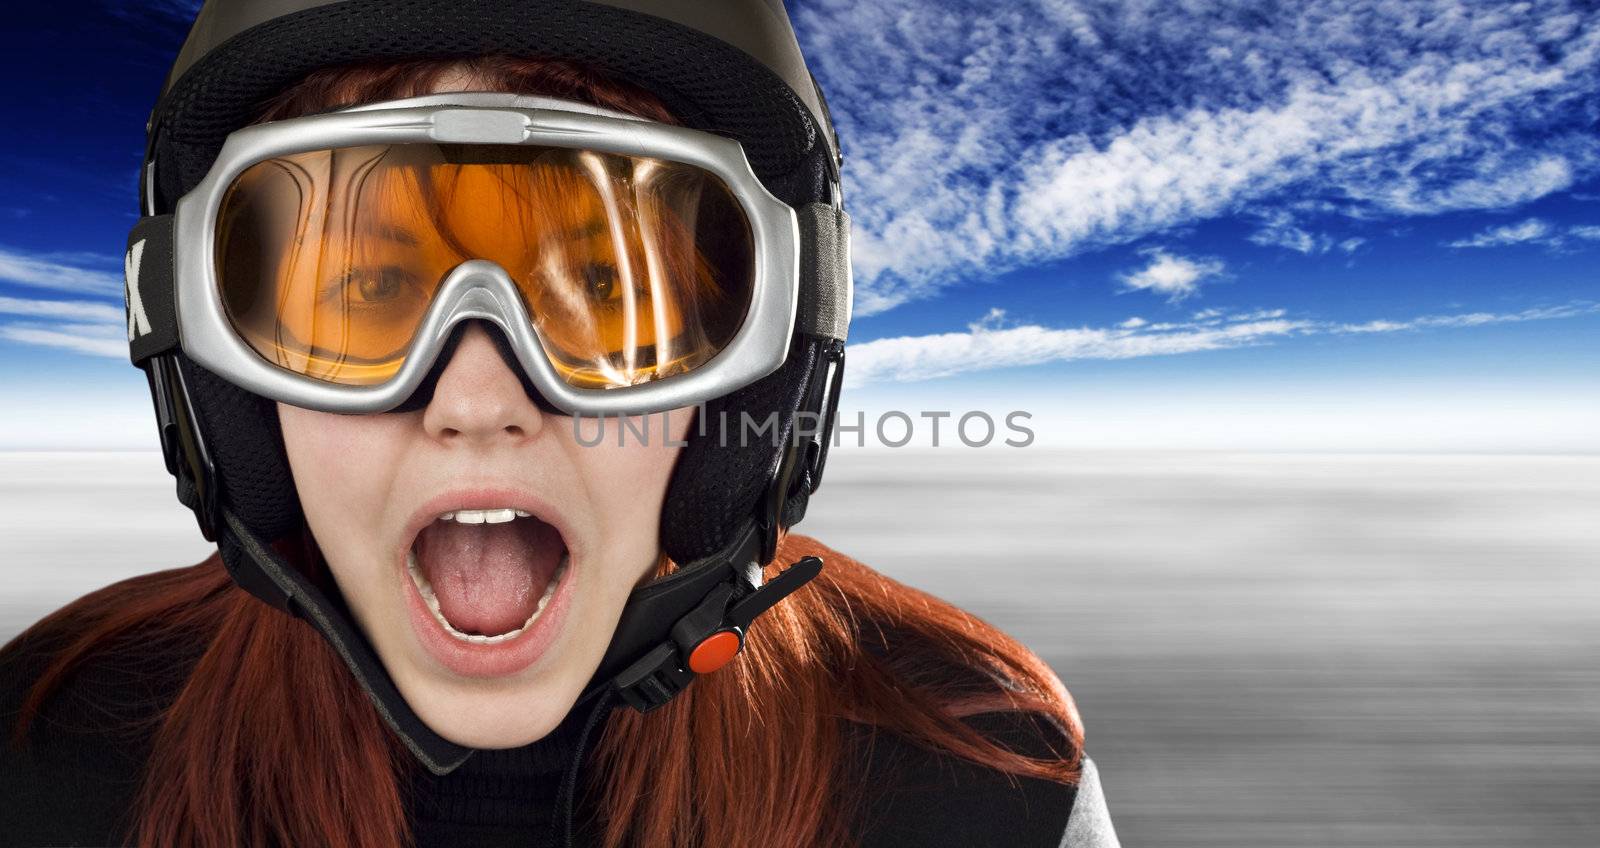 Cute girl with snowboarding helmet and goggles by domencolja